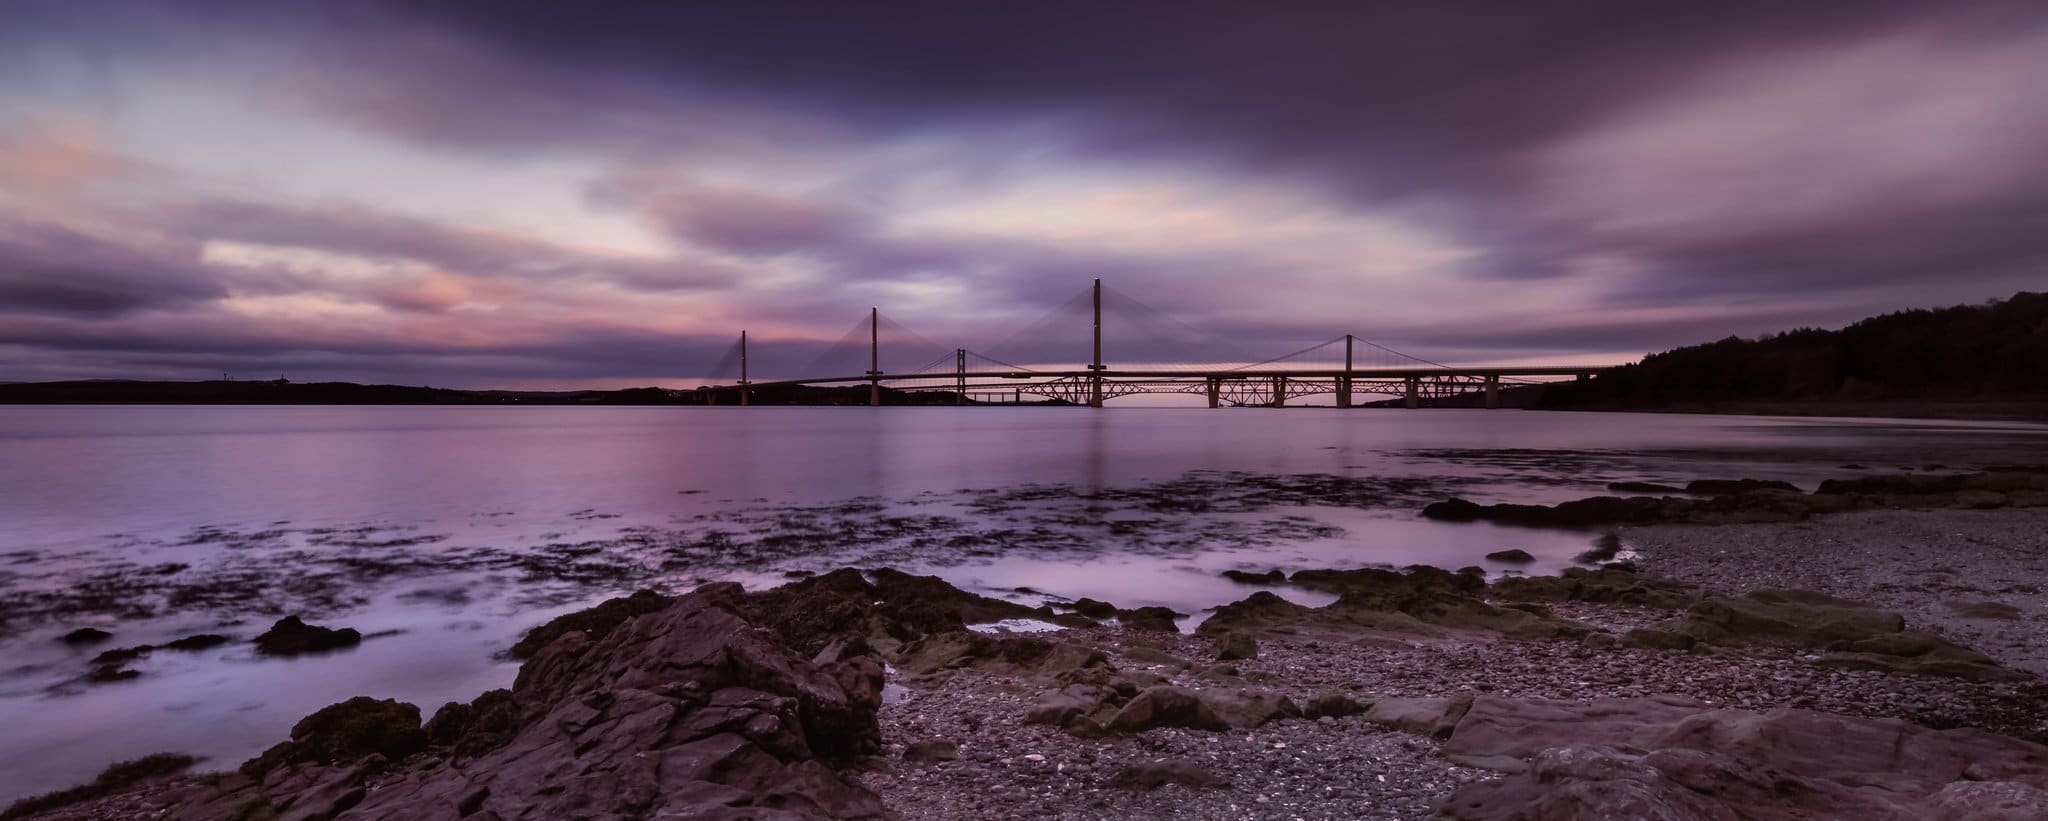 The Queensferry Crossing at sunset by Impact Imagz @ImpactImagz